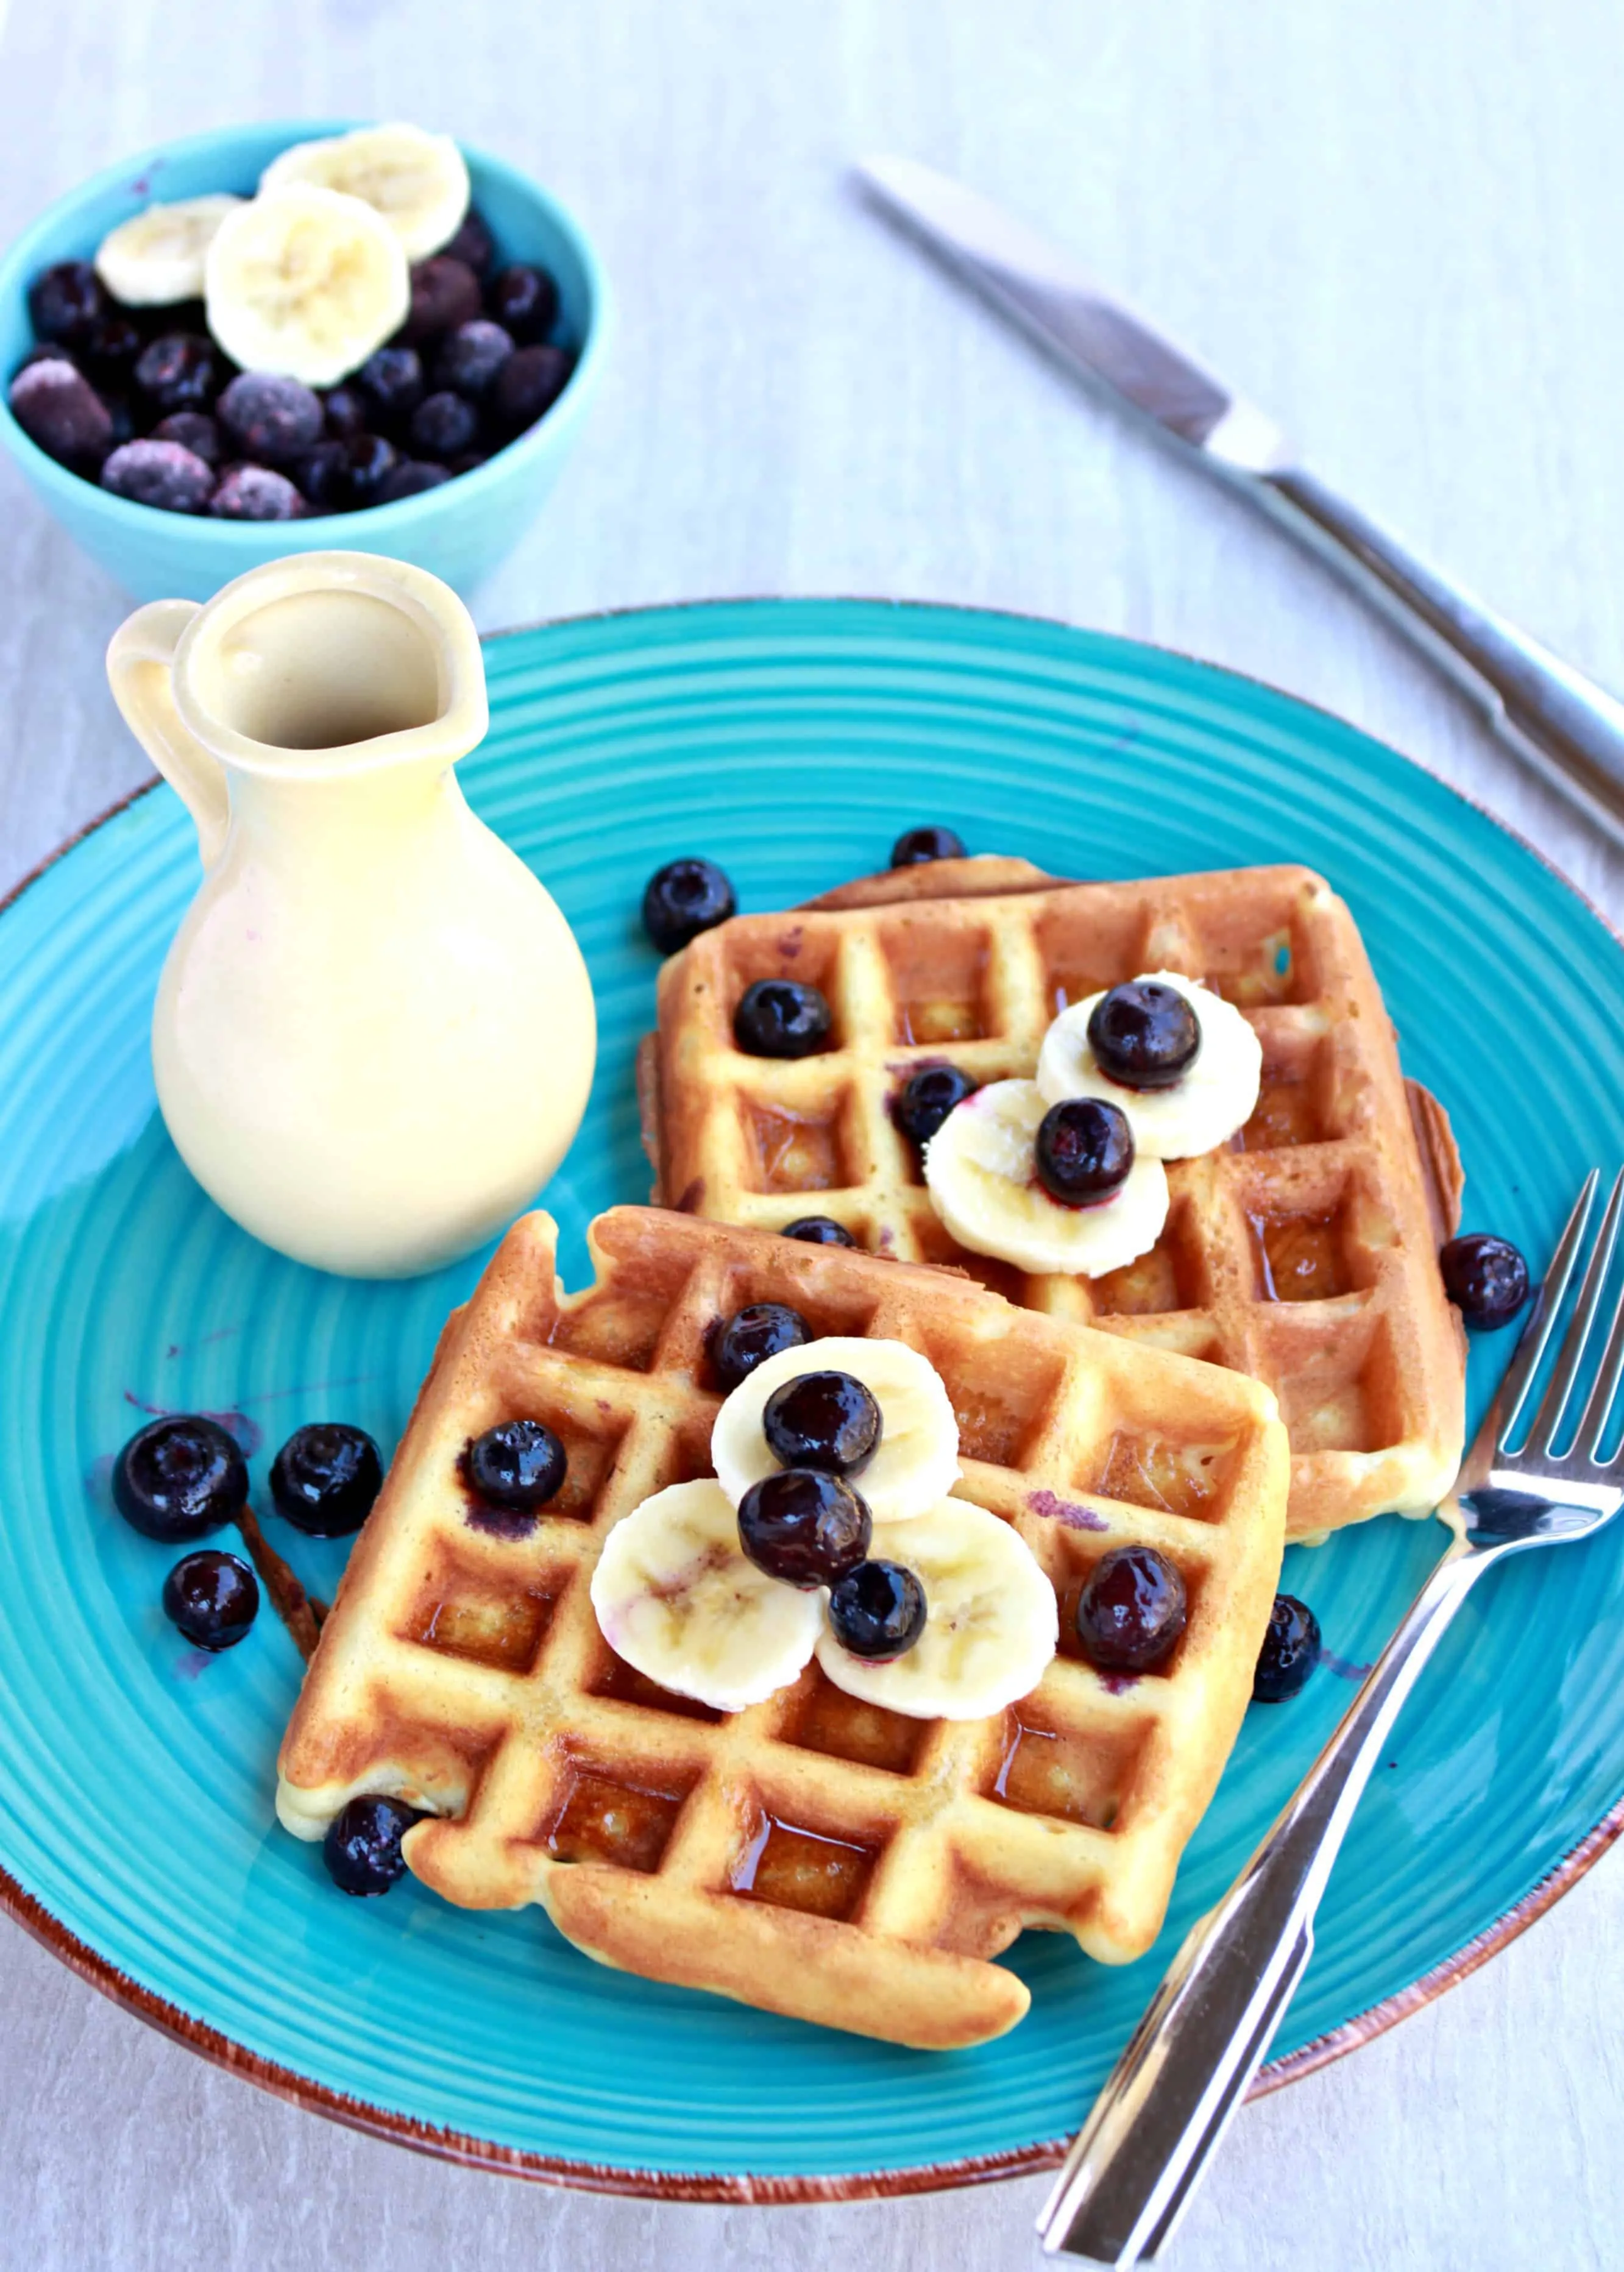 Waffles with banana and berries